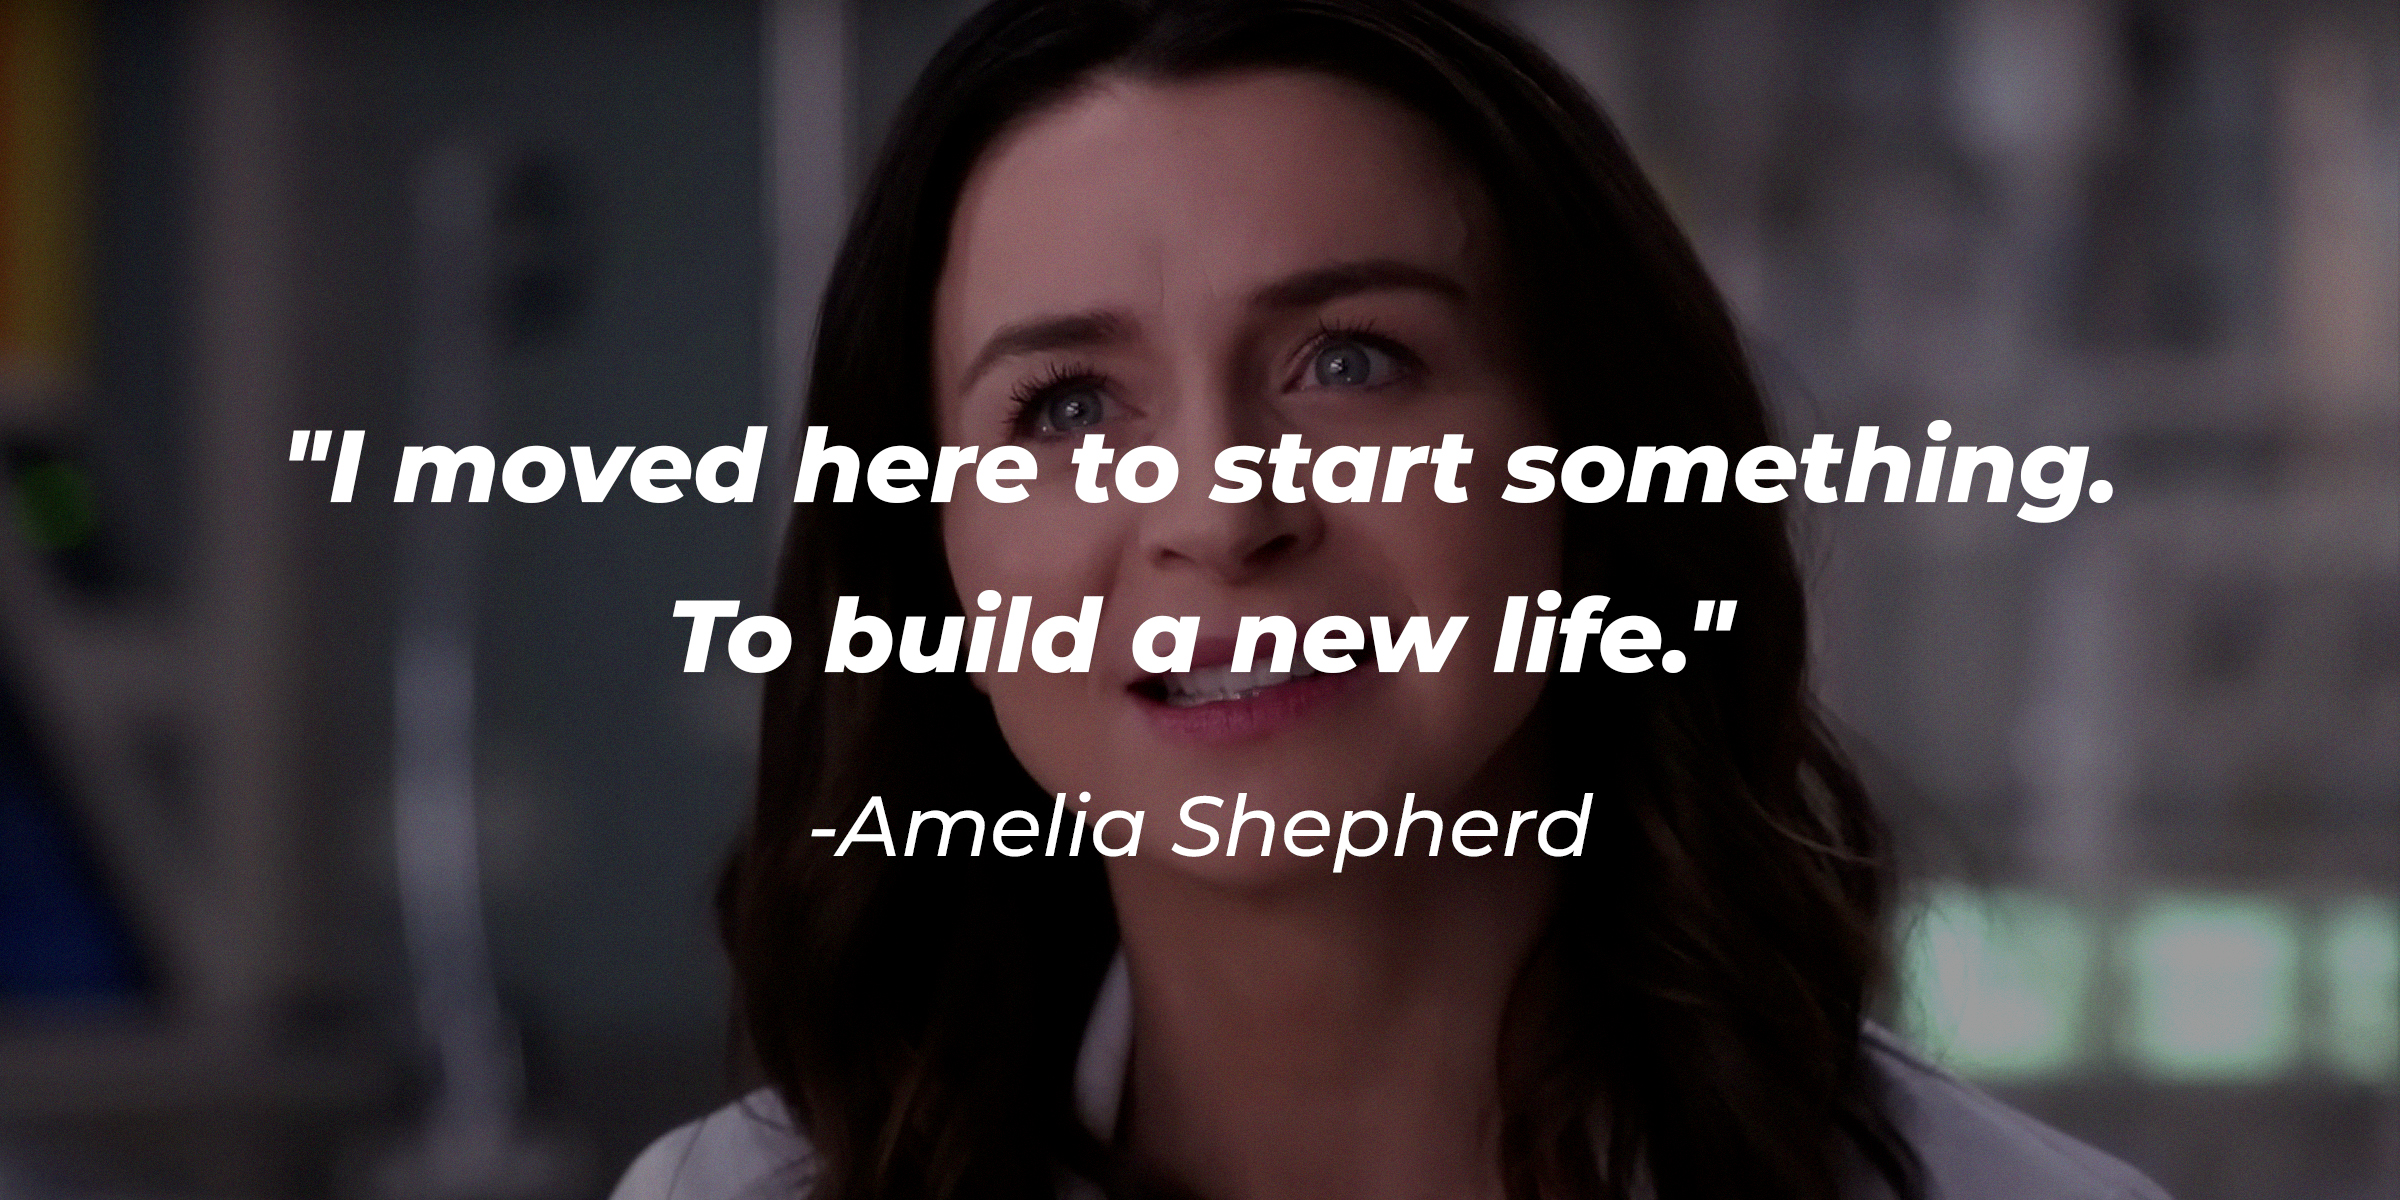 An image of Amelia Shepherd with her quote: "I moved here to start something. To build a new life." | Source: Facebook.com/GreysAnatomy